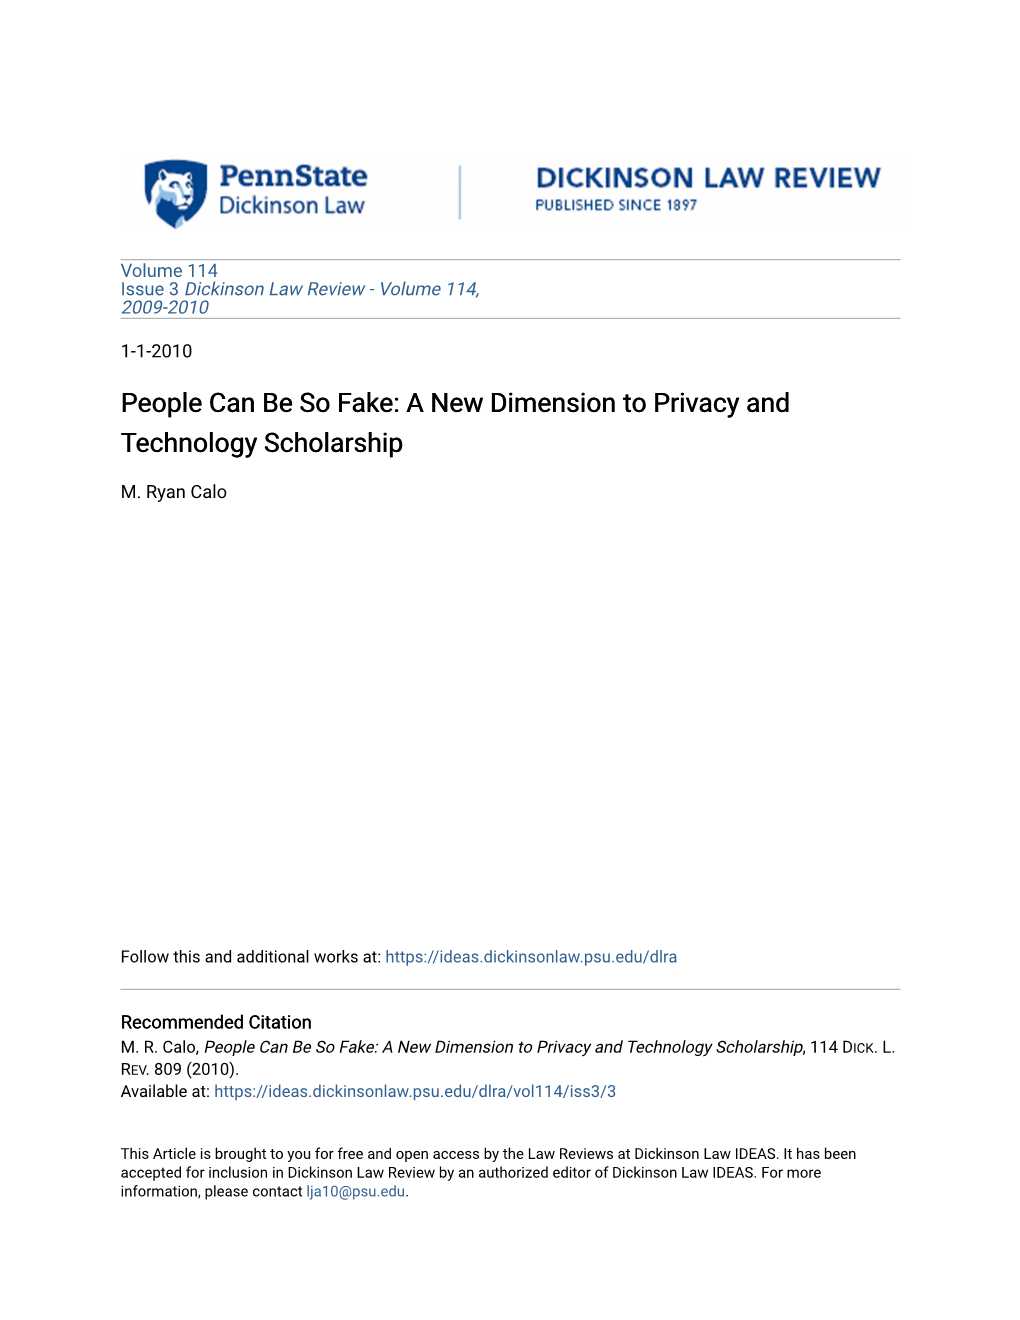 People Can Be So Fake: a New Dimension to Privacy and Technology Scholarship